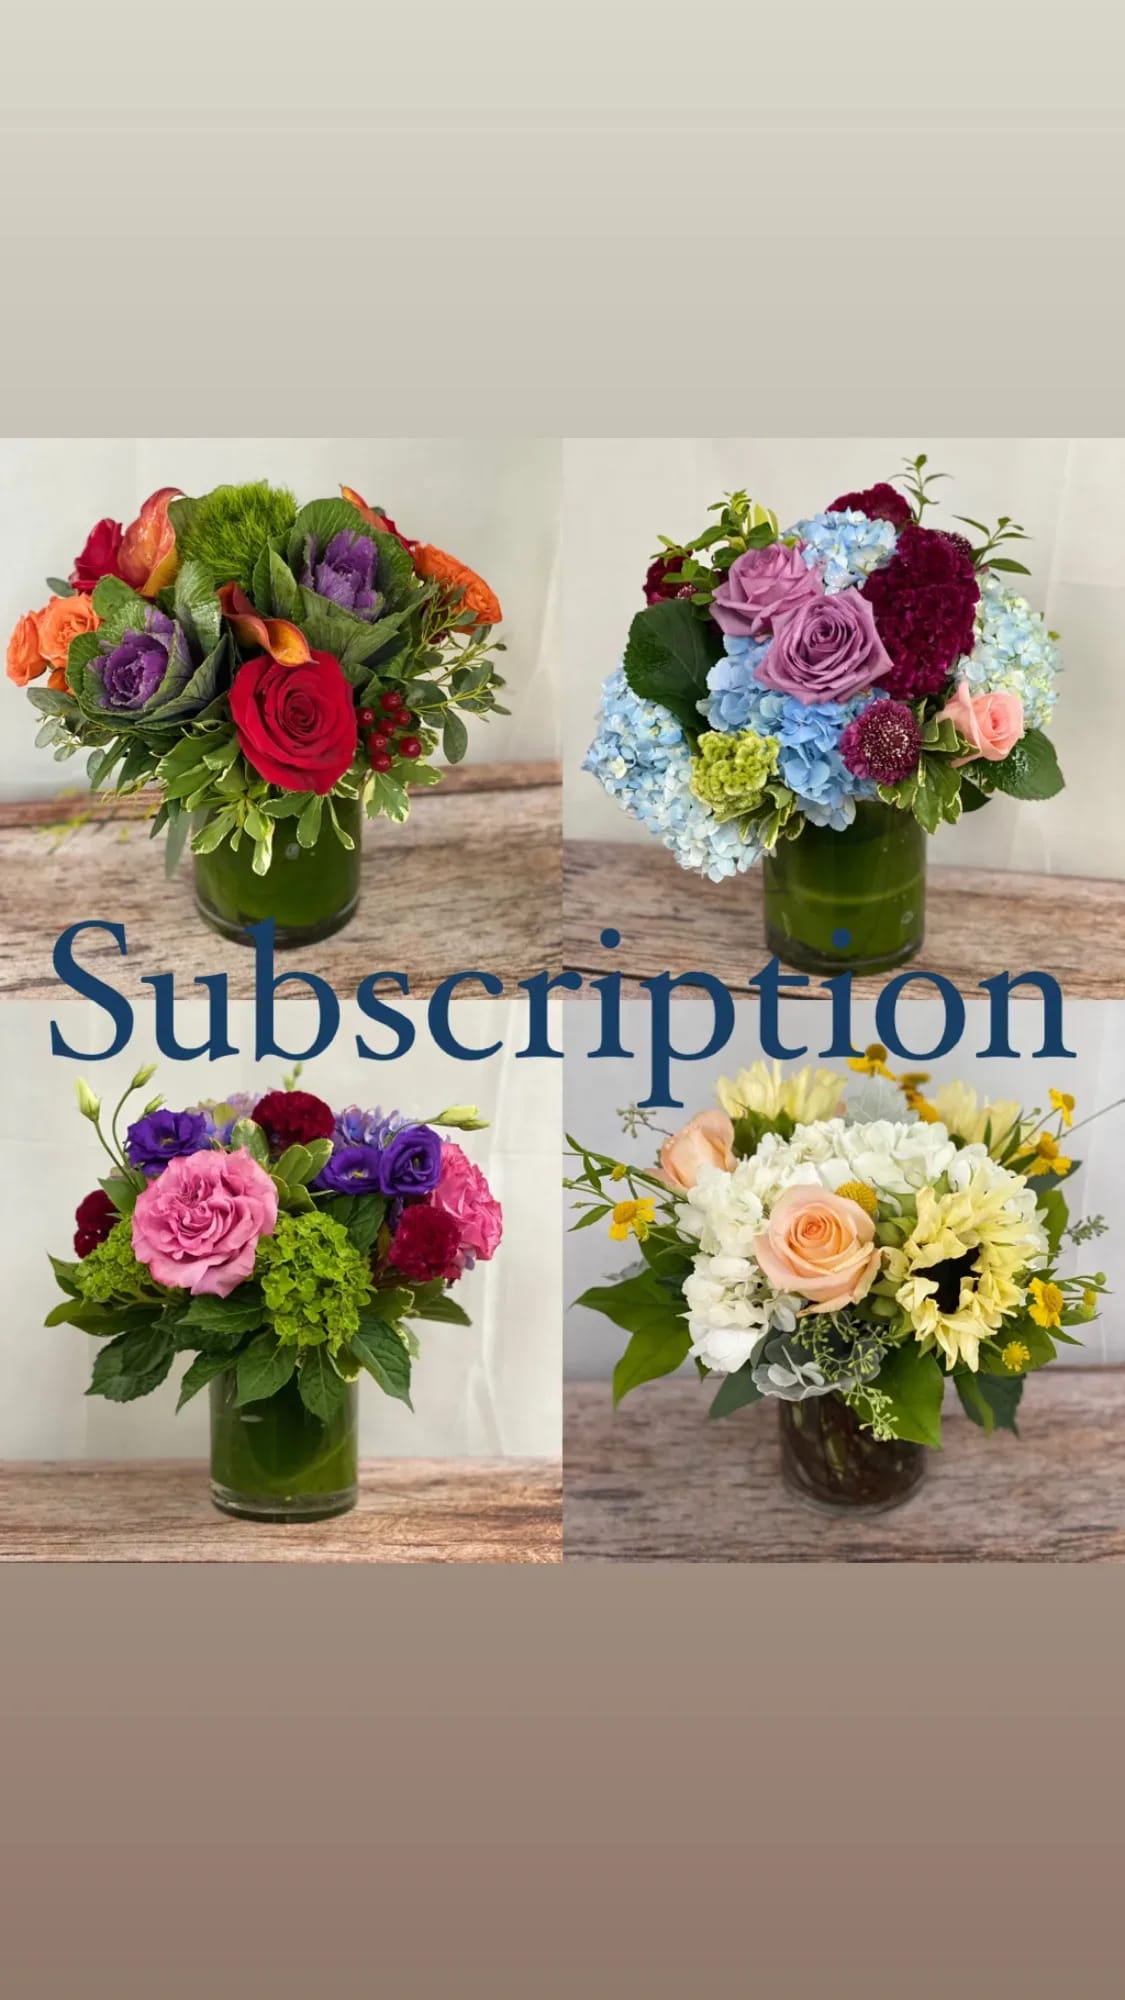 Weekly Subscritpion - The gift that keeps on giving! Perfect for your home, office or gift for that special someone. Fresh, seasonal blooms will arrive each week at your door. Have a certain style you'd like us to accommodate? Let us know in the special instructions field.